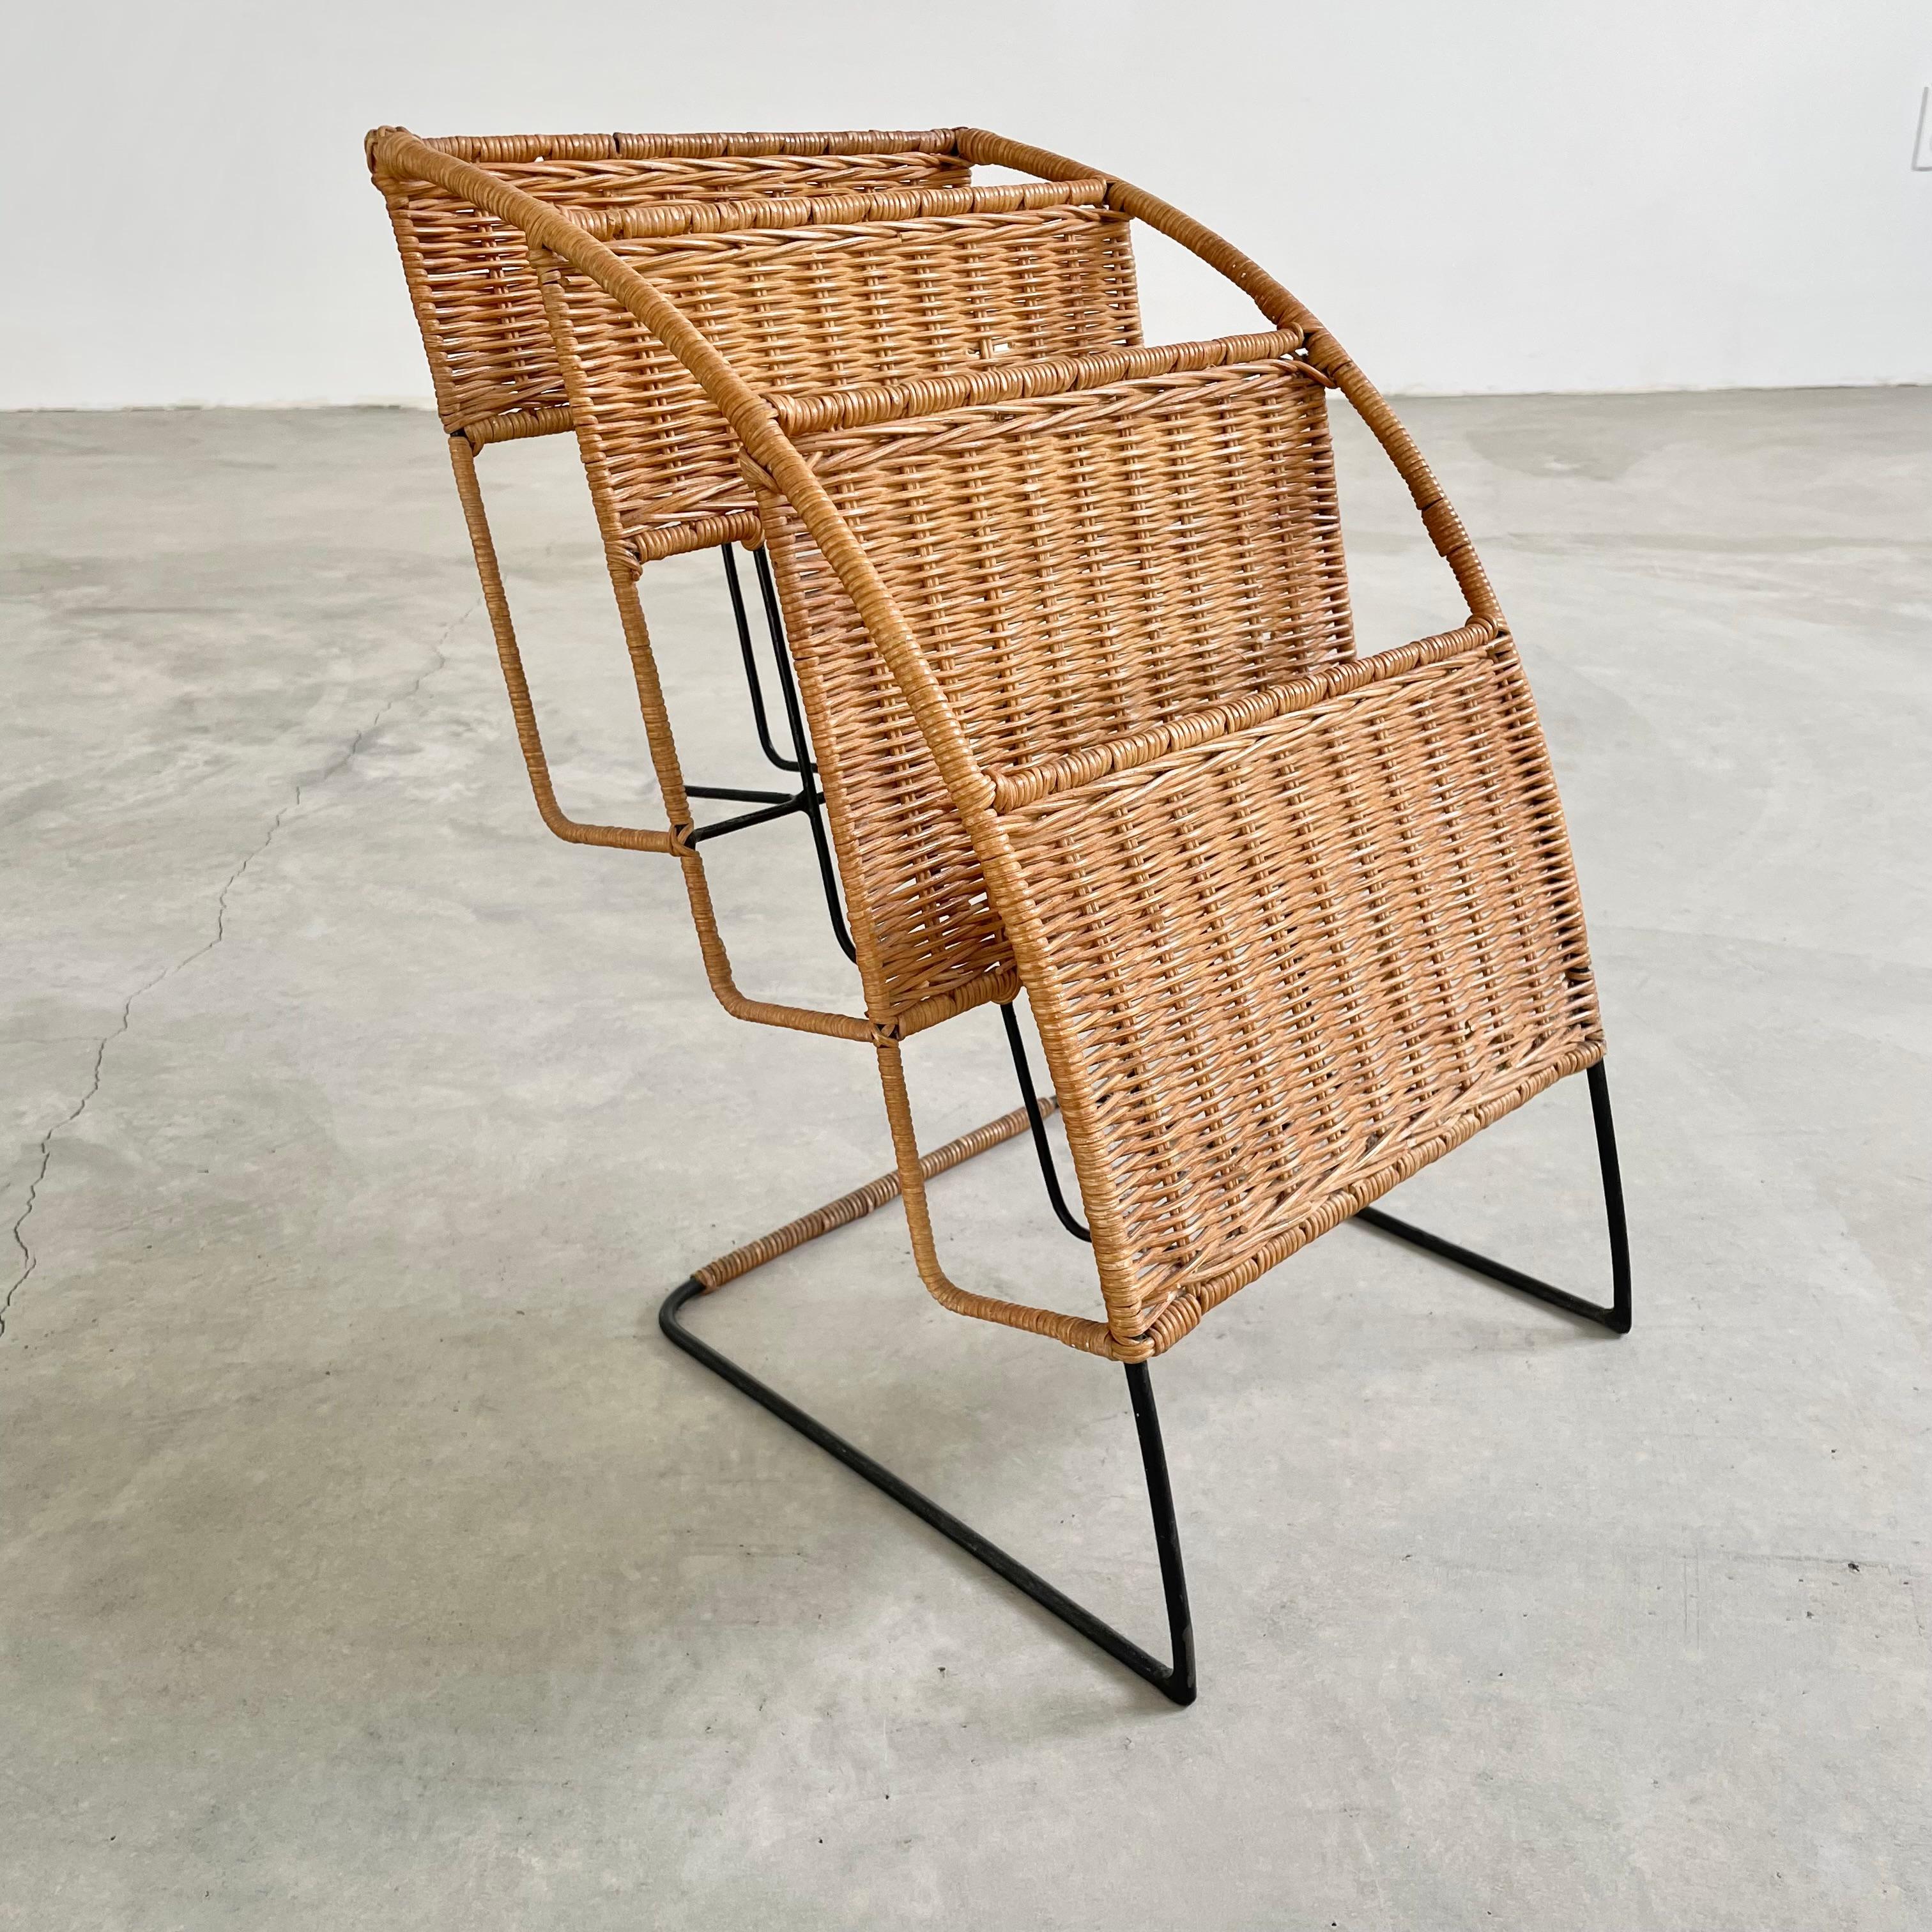 Rattan, wicker and iron magazine rack attributed to Jacques Adnet. Iron frame wrapped with wicker accents and trays. Three angled metal trays to hold magazines or books. Great sculptural piece. Good vintage condition.